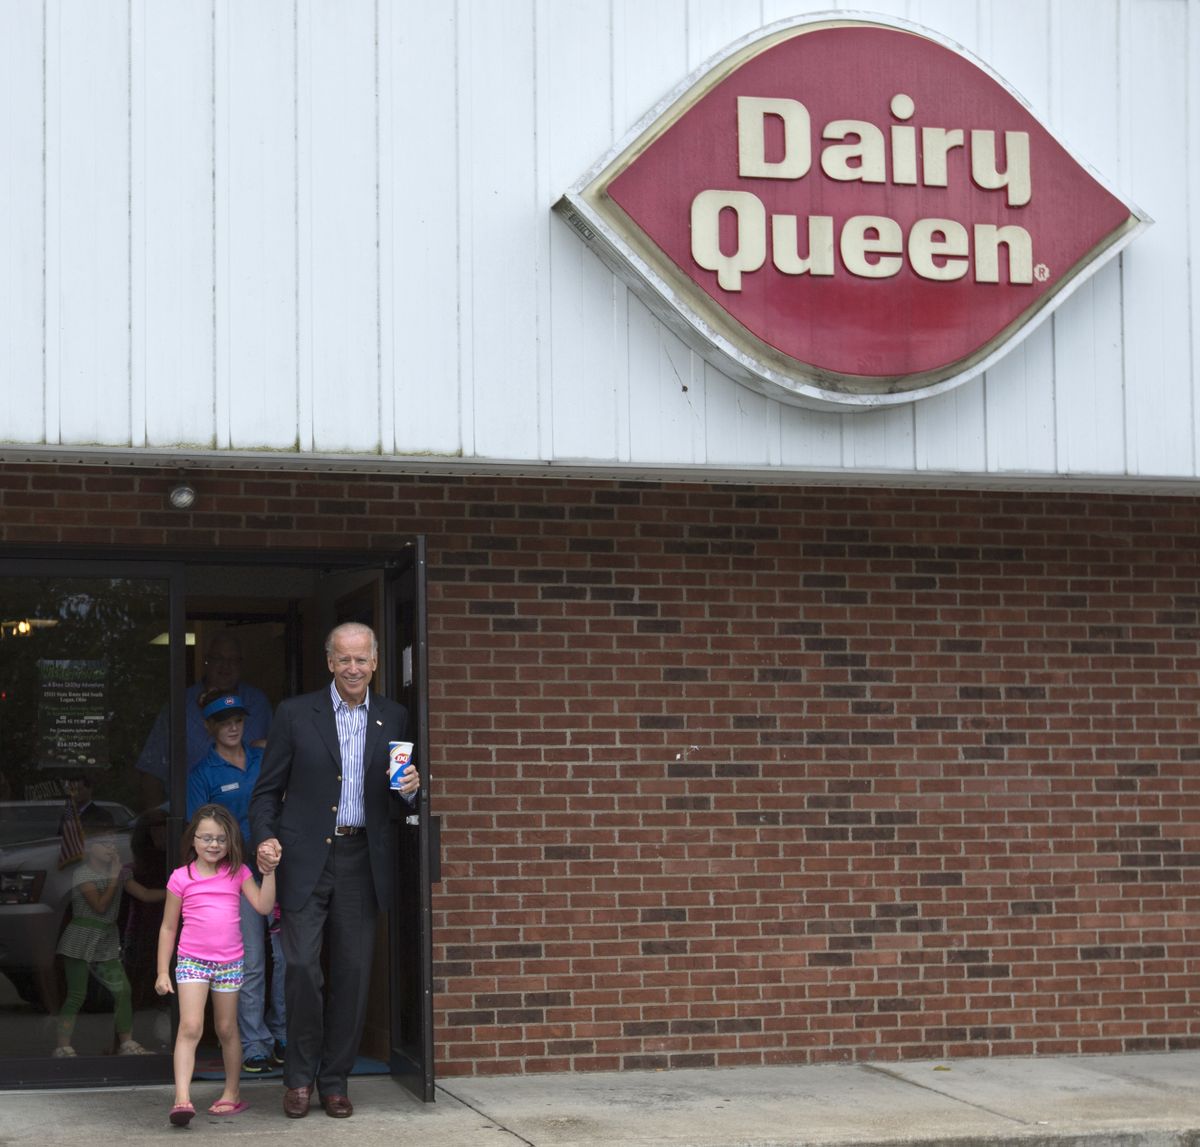 Vice President Joe Biden leaves Dairy Queen with an ice cream cone and holding the hands of a little girl, Saturday, Sept. 8, 2012, in Nelsonville, Ohio. (Carolyn Kaster / Associated Press)